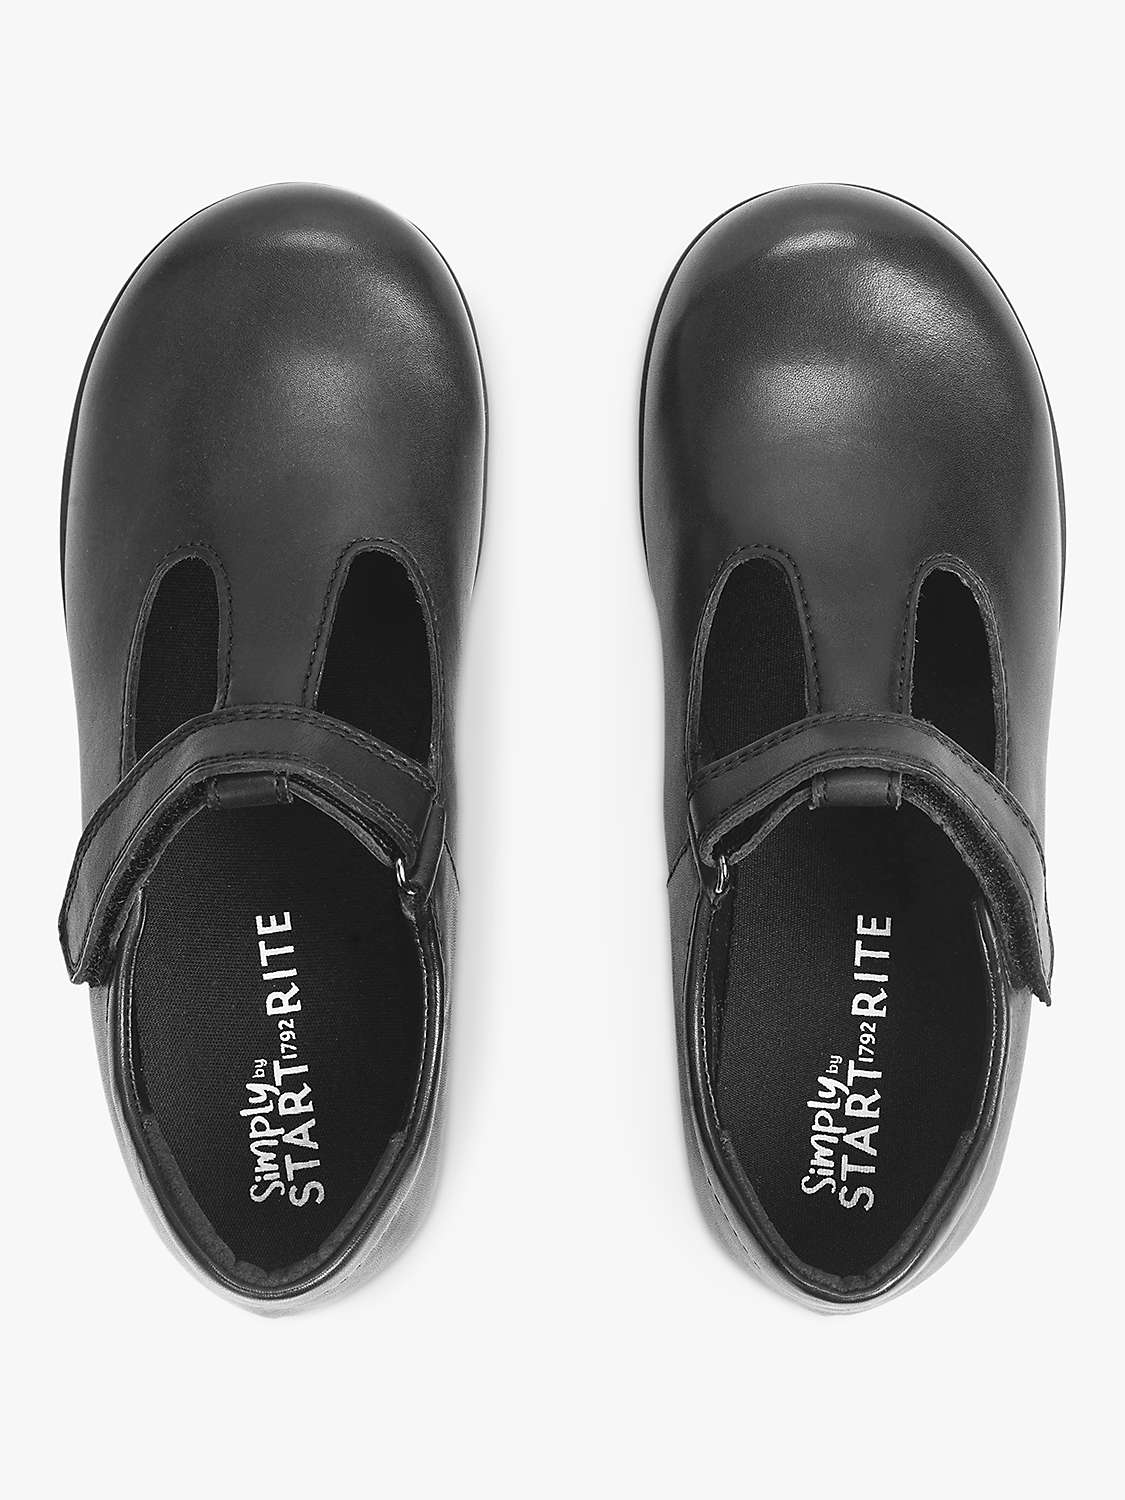 Buy Simply by Start-Rite Kids' Lesson T-Bar School Shoes Online at johnlewis.com